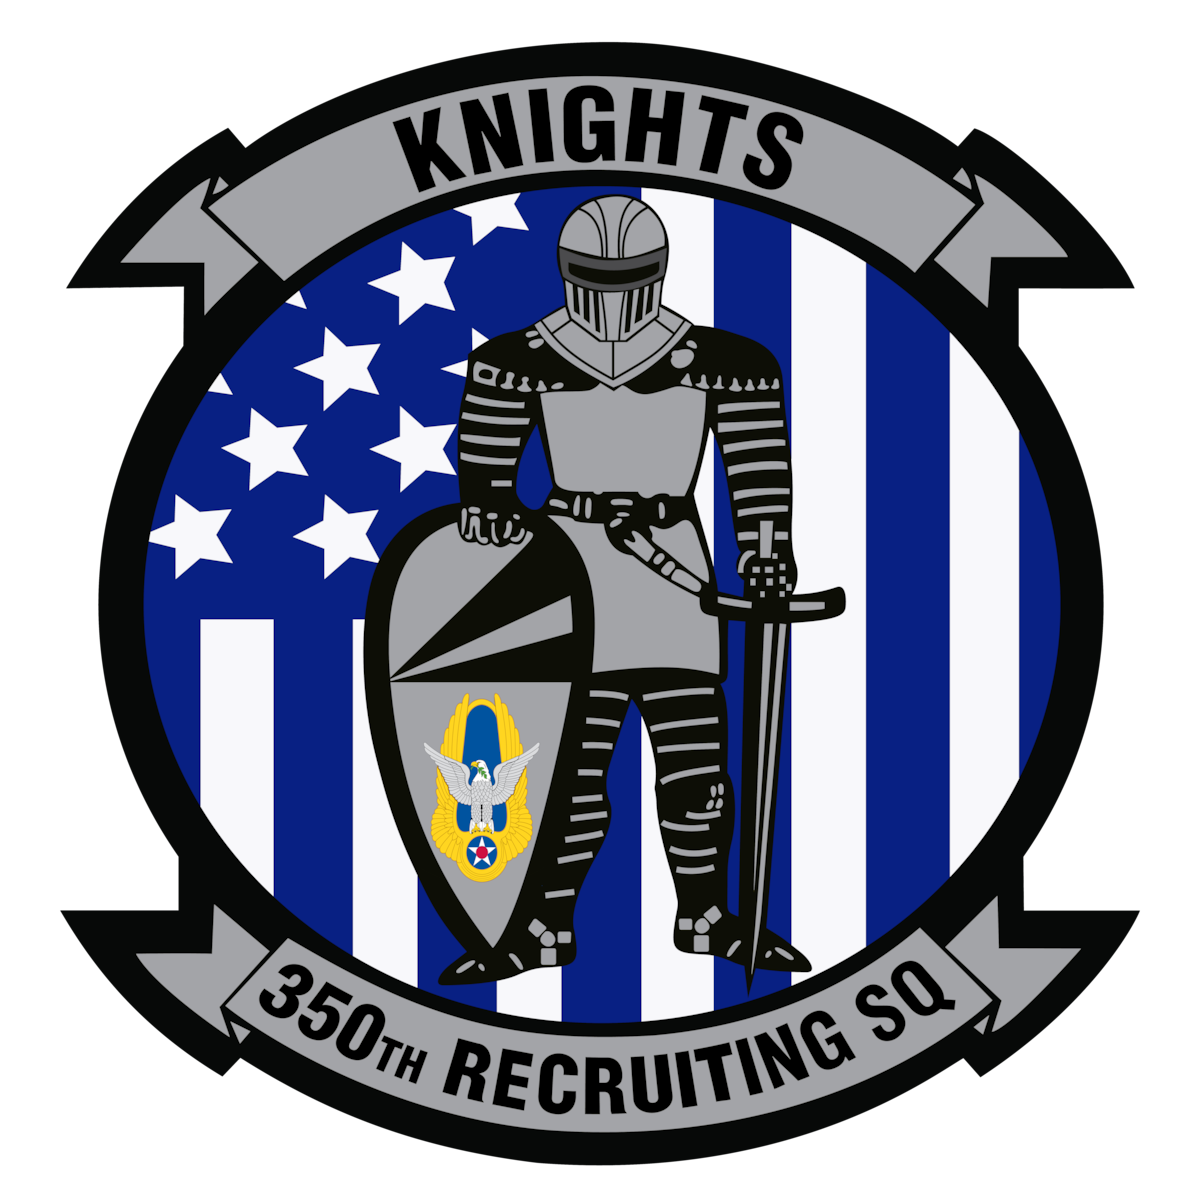 350th Recruiting Squadron graphic shield/patch